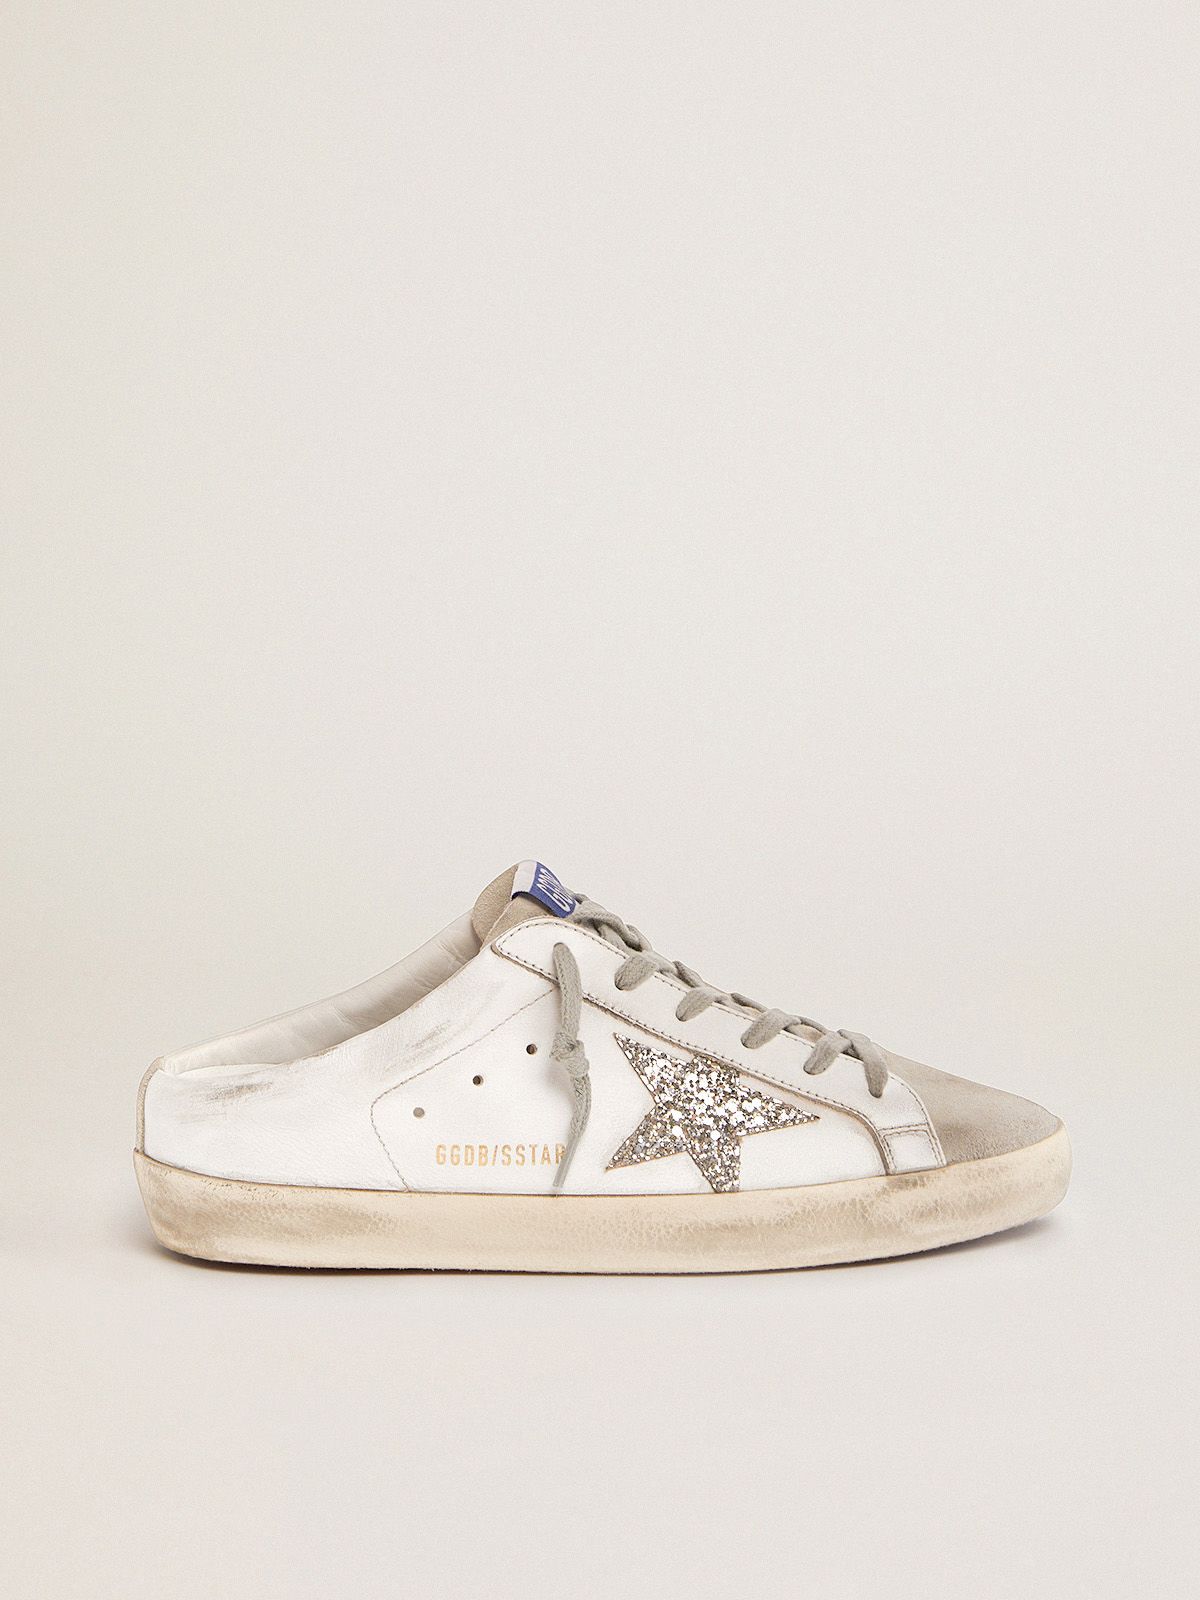 golden goose Super-Star with gray star white in leather Sabots silver glitter suede and